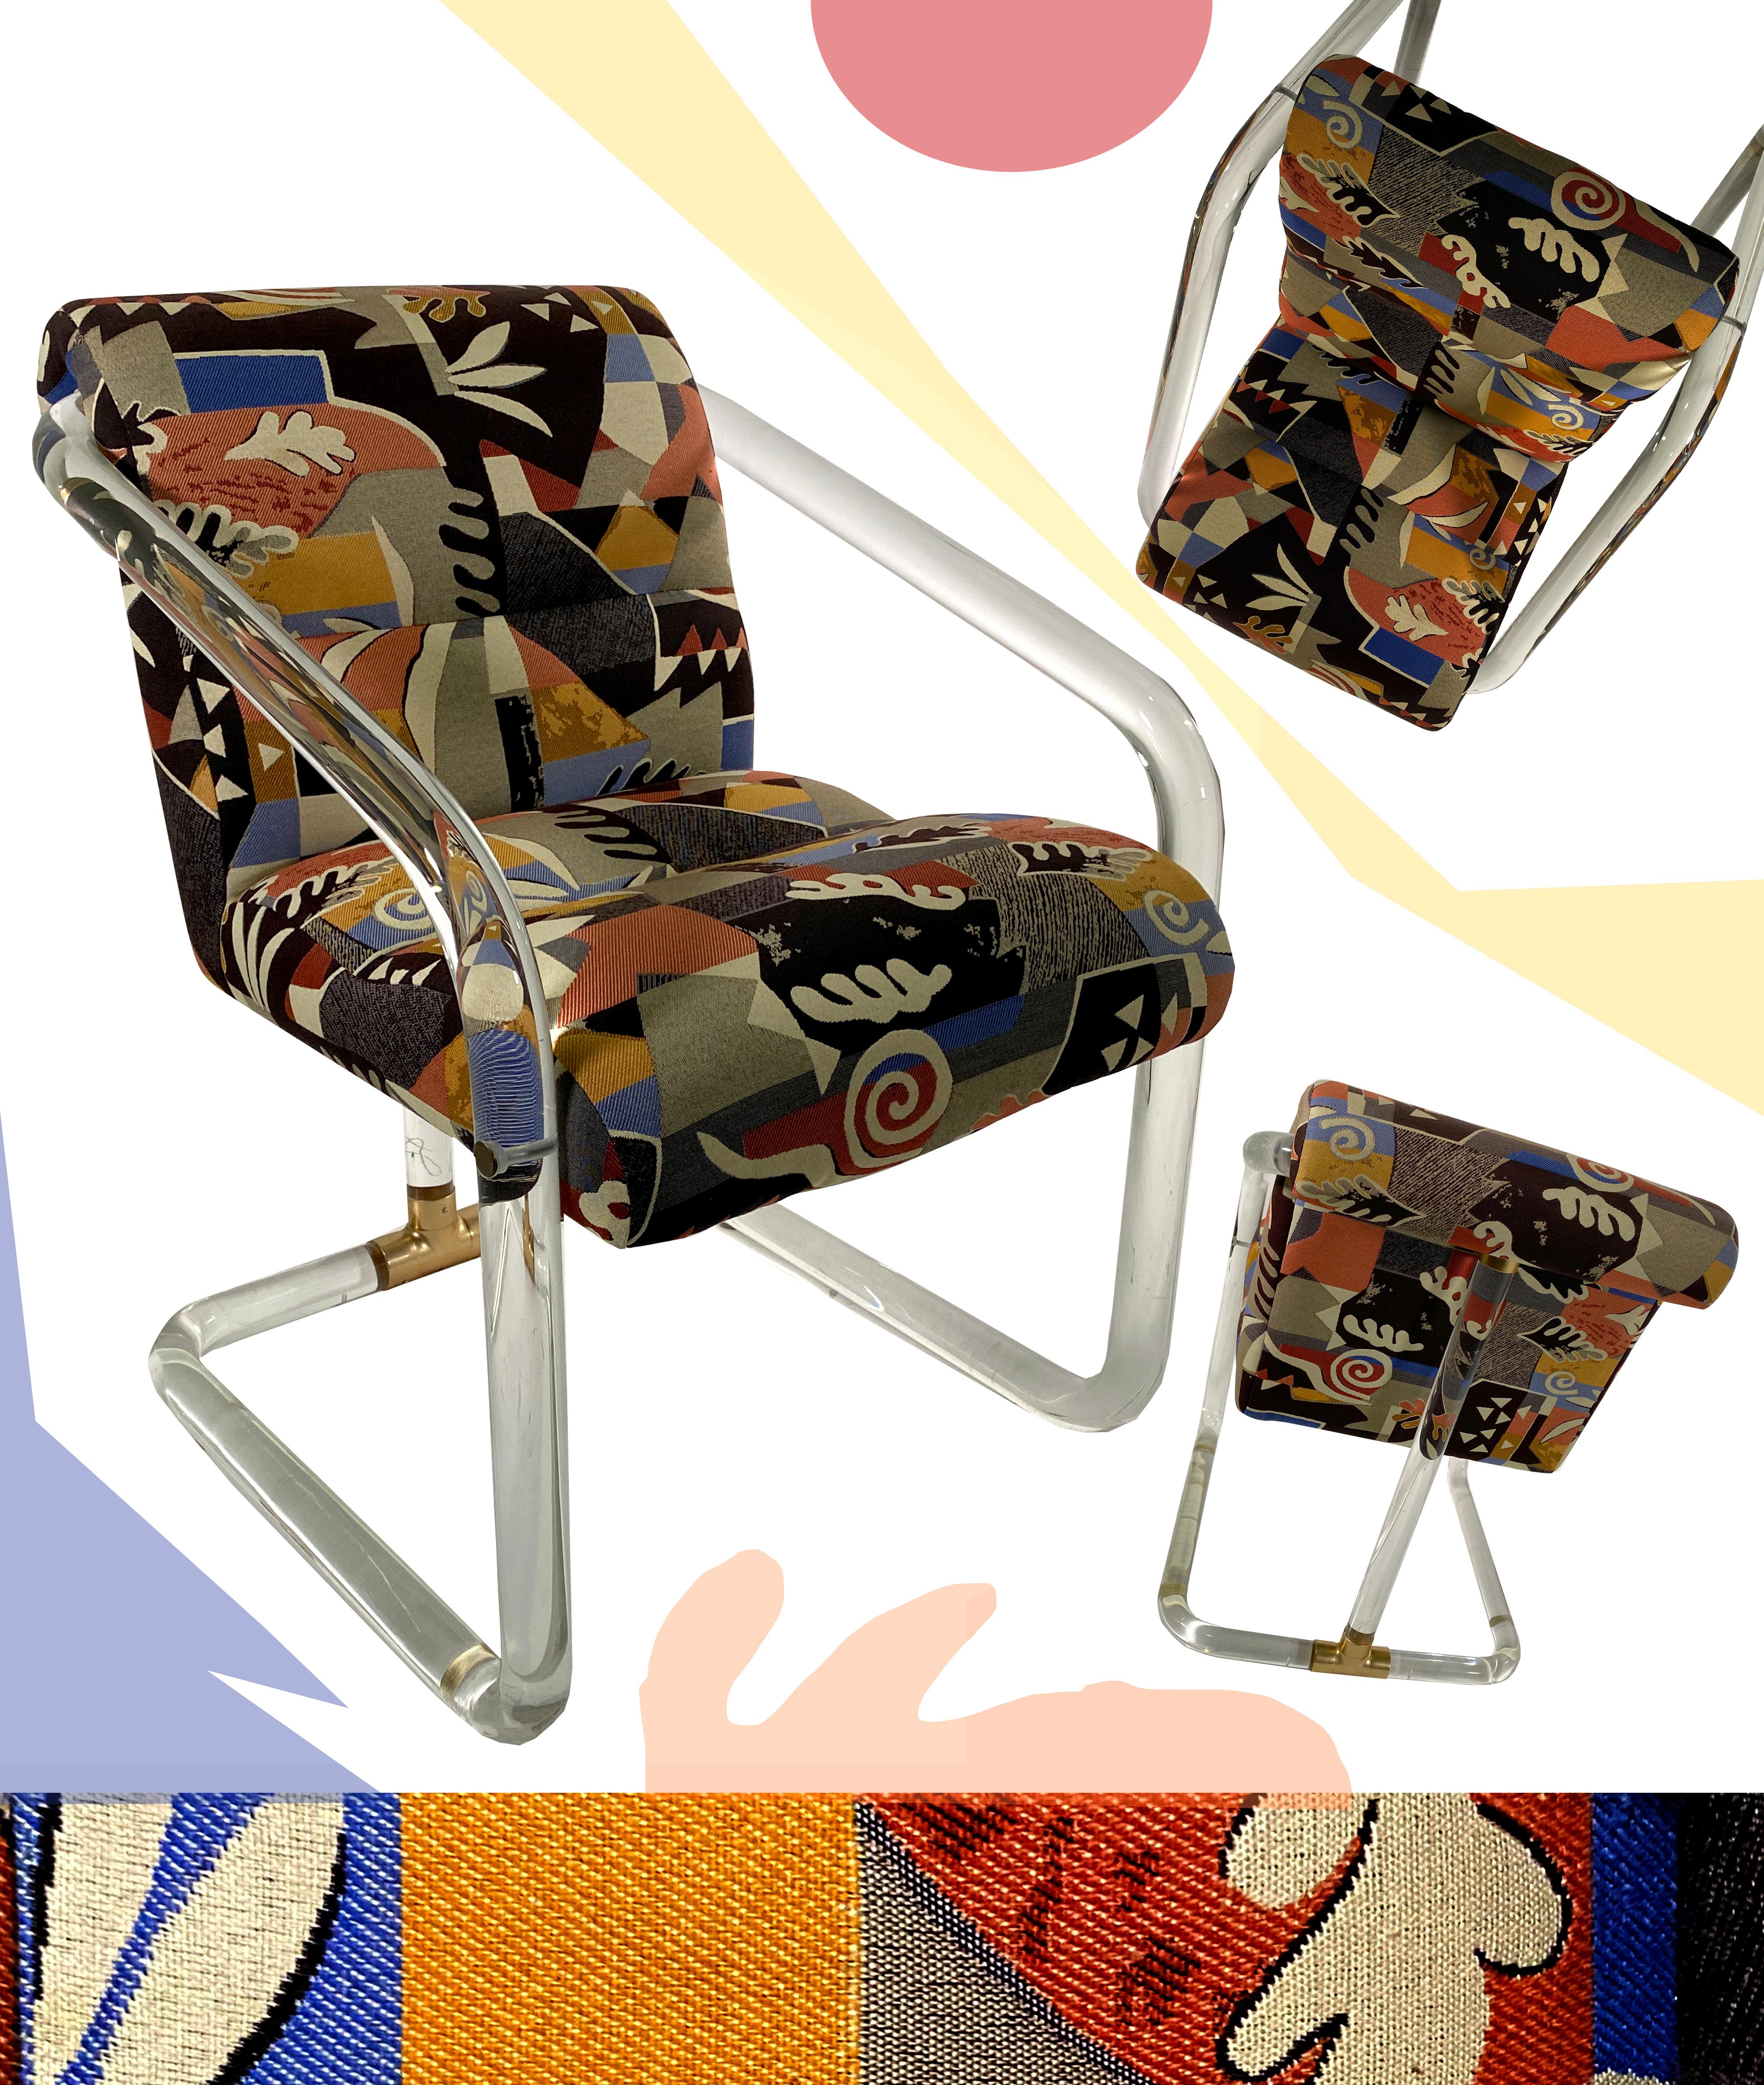 A beautiful pair of chairs, by Lion in Frost, with fabric derived by Henri Mattise. The chairs are sculptural with lucite tubes for arms/supports down the leg, the connections done in brass. The fabric is a rich upholstery with shapes and colors